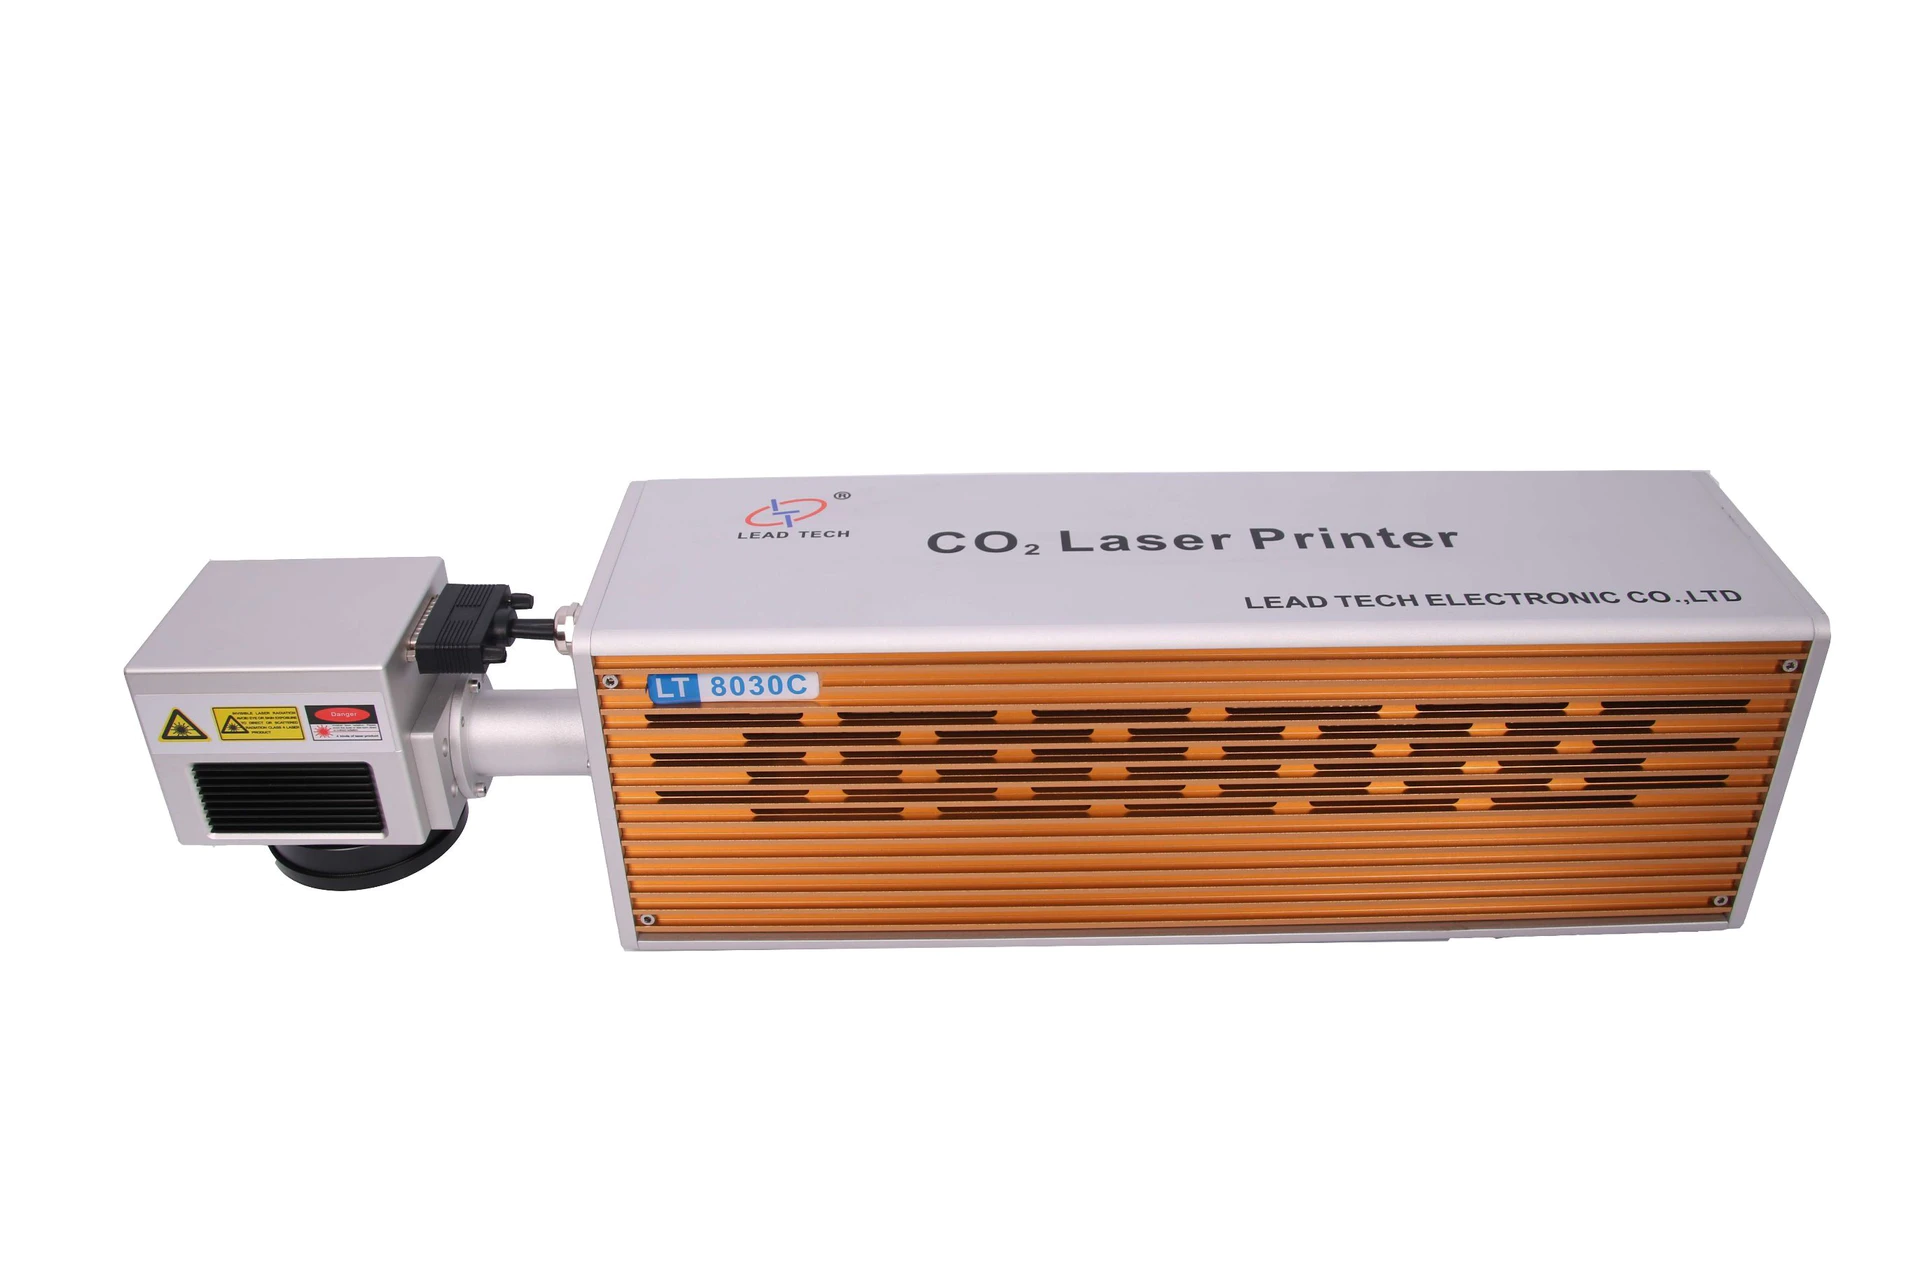 Lt8020c/Lt8030c CO2 High Speed Bar Code Date Character Laser Printer for Cable and Bottle